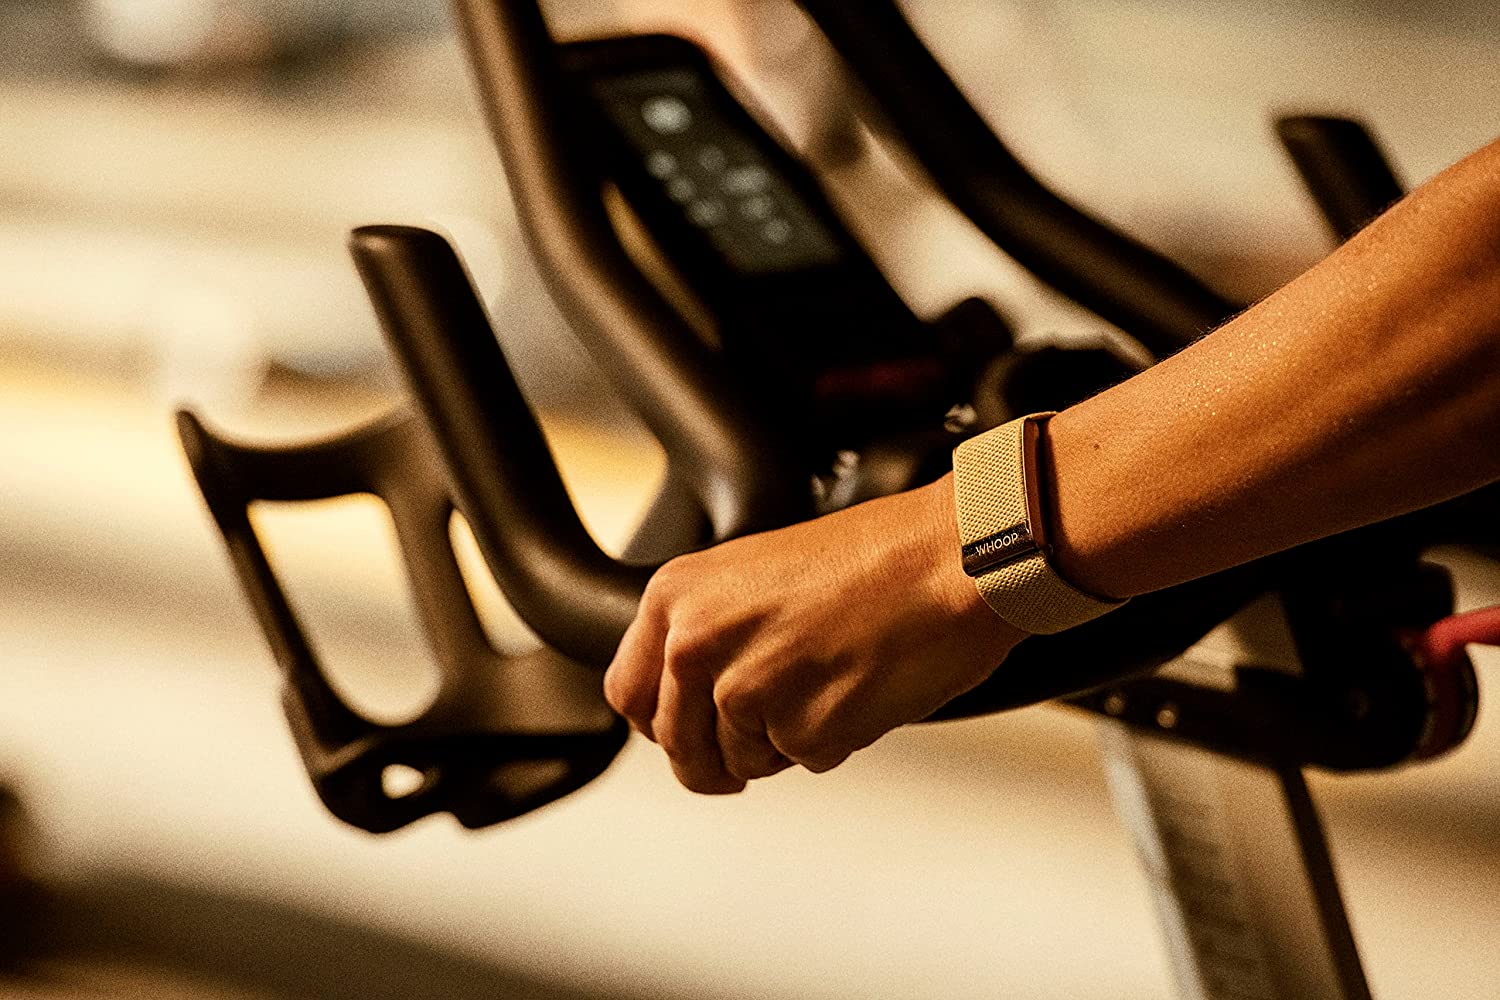 Tracking Your Fitness Goals? Here's a Comparison of the Top Fitness Trackers!